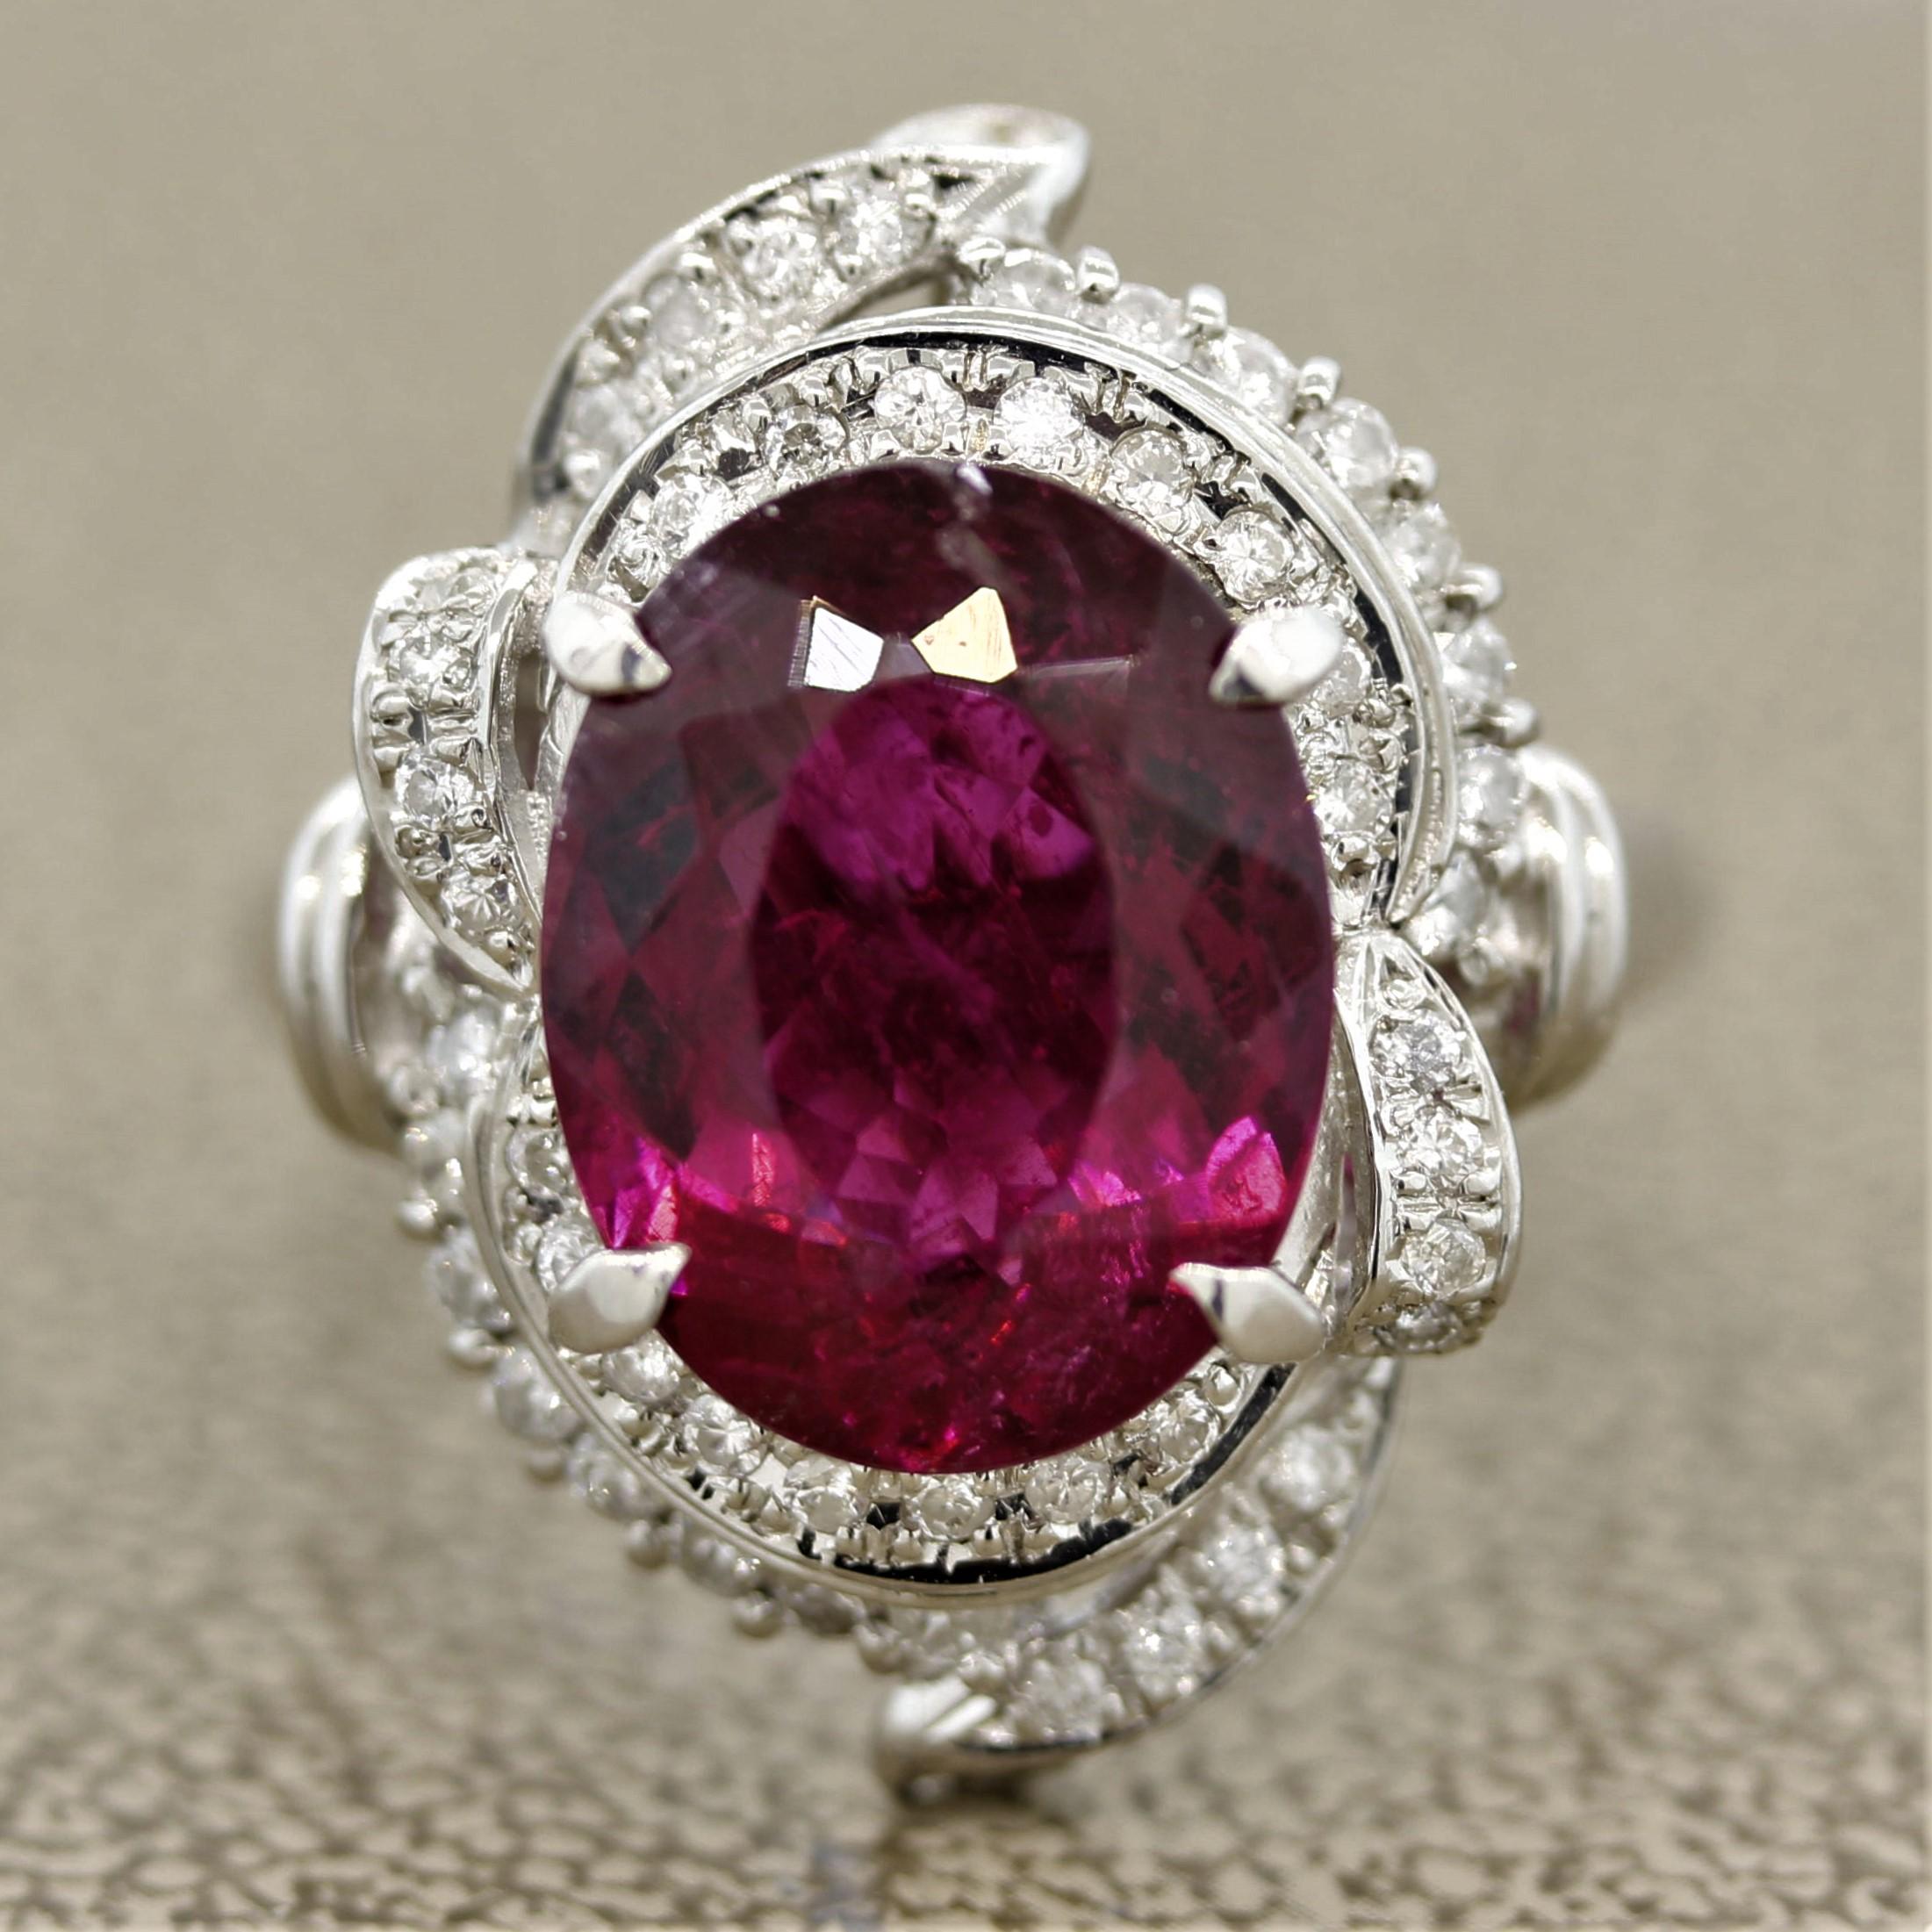 An exceptional tourmaline weighing 6.03 carats is featured in this platinum ring. It has an intense and vivid red color that rivals the finest rubies which is why this variety of tourmaline was given the name “Rubellite.” It is free of any